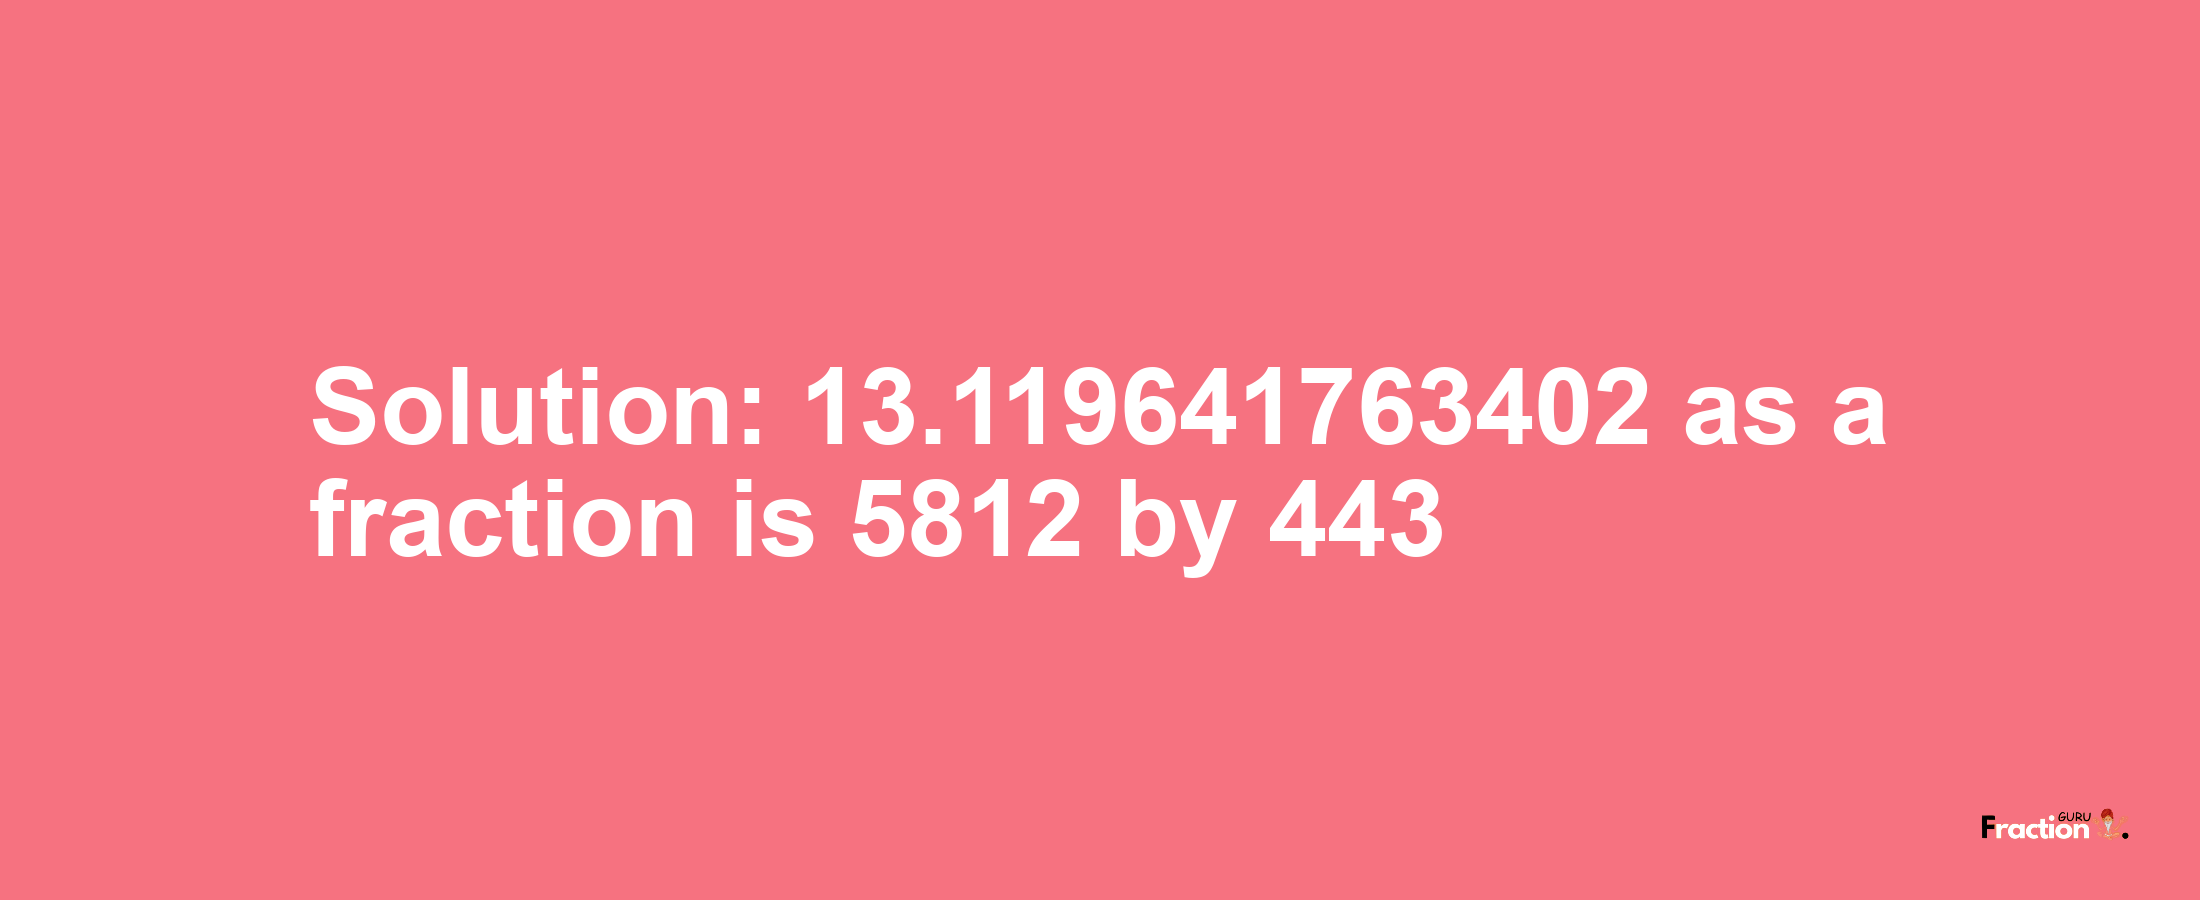 Solution:13.119641763402 as a fraction is 5812/443